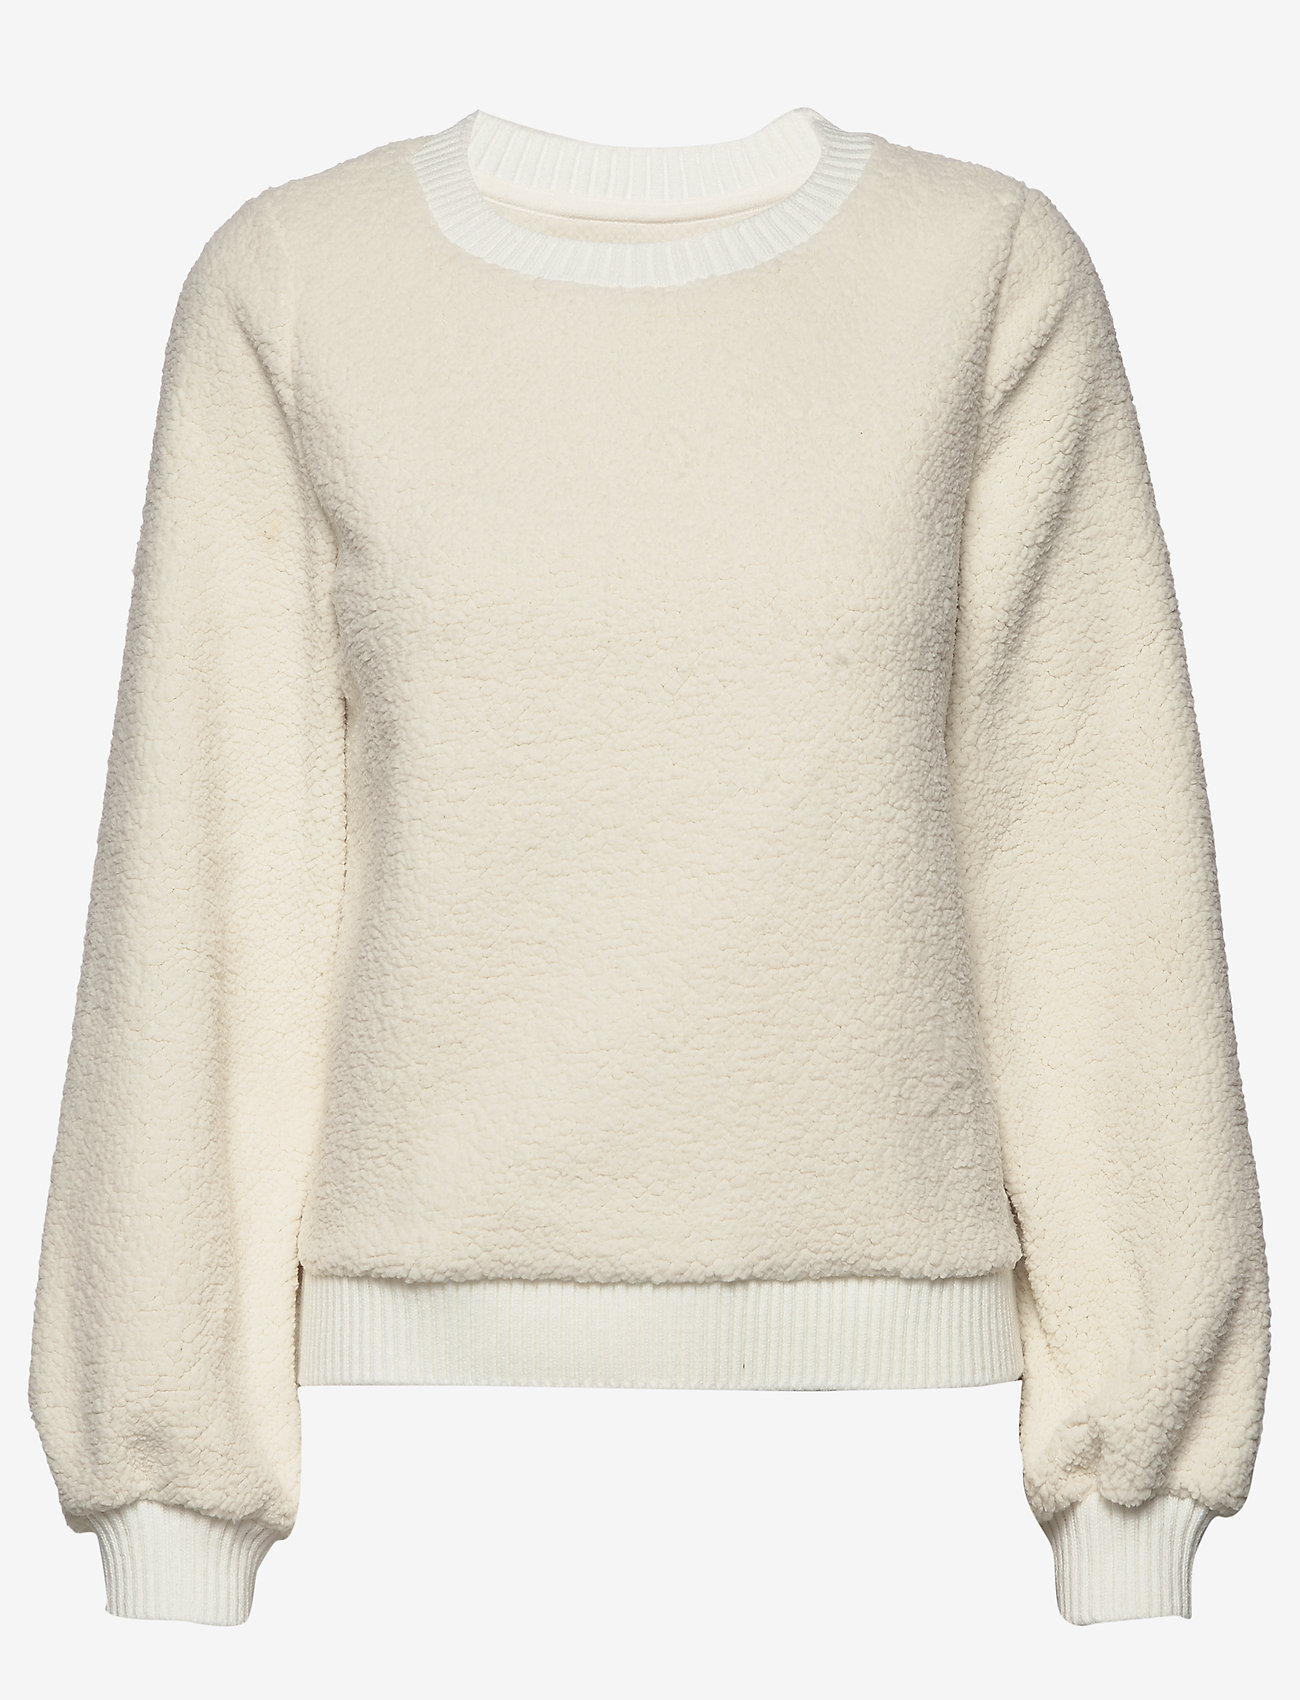 abercrombie & fitch sherpa pullover